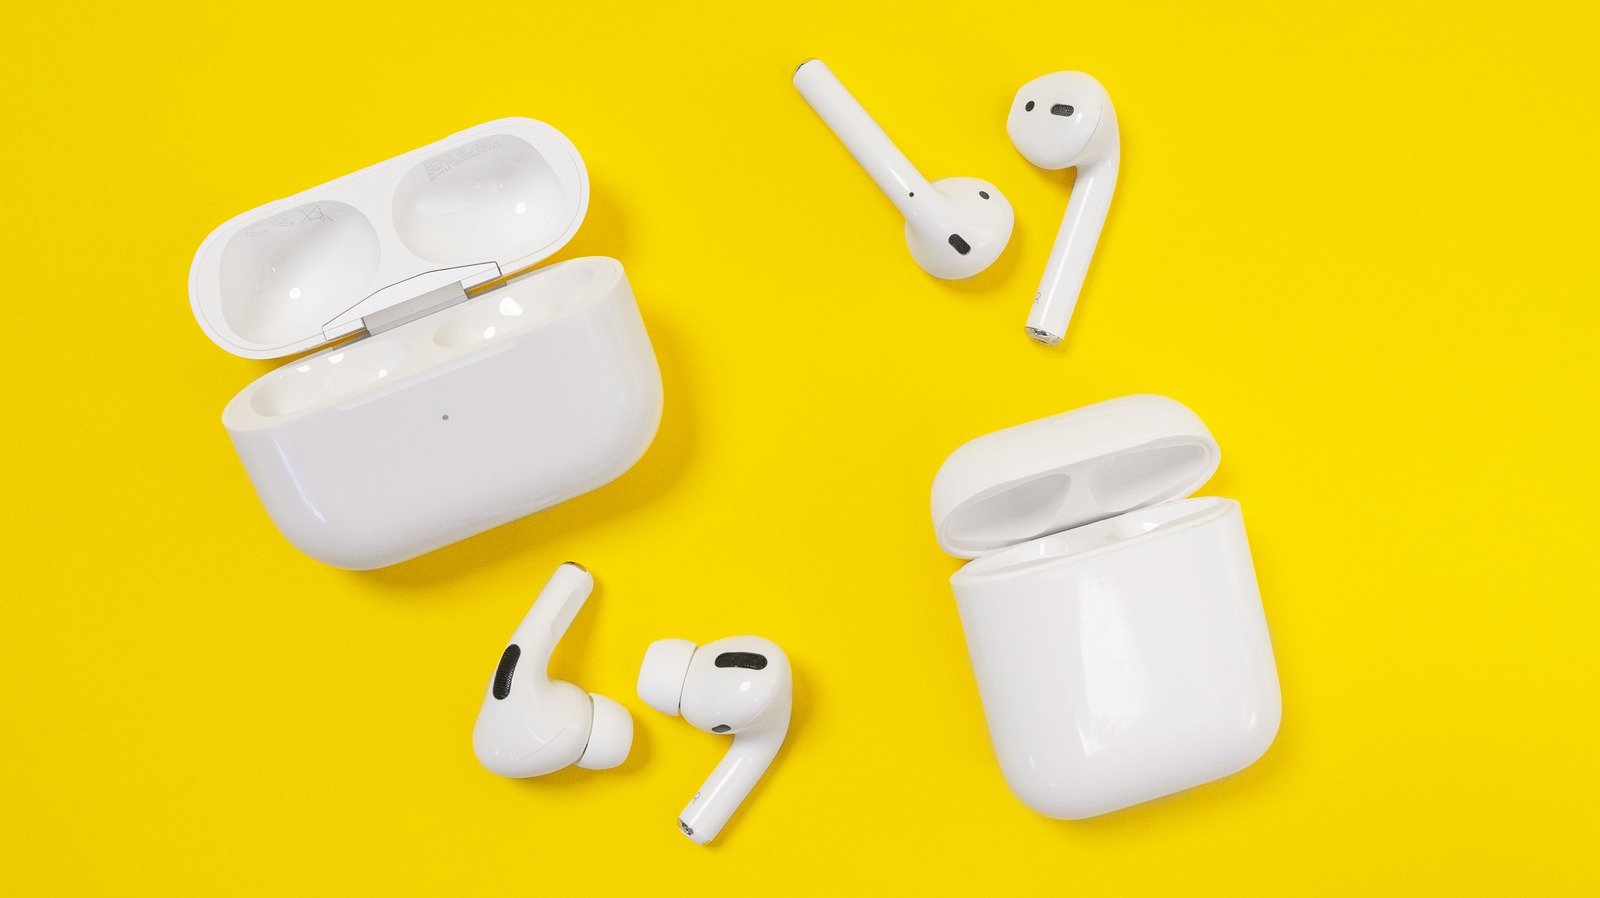 How To Tell If Your Apple AirPods Are Fake (4 Ways)